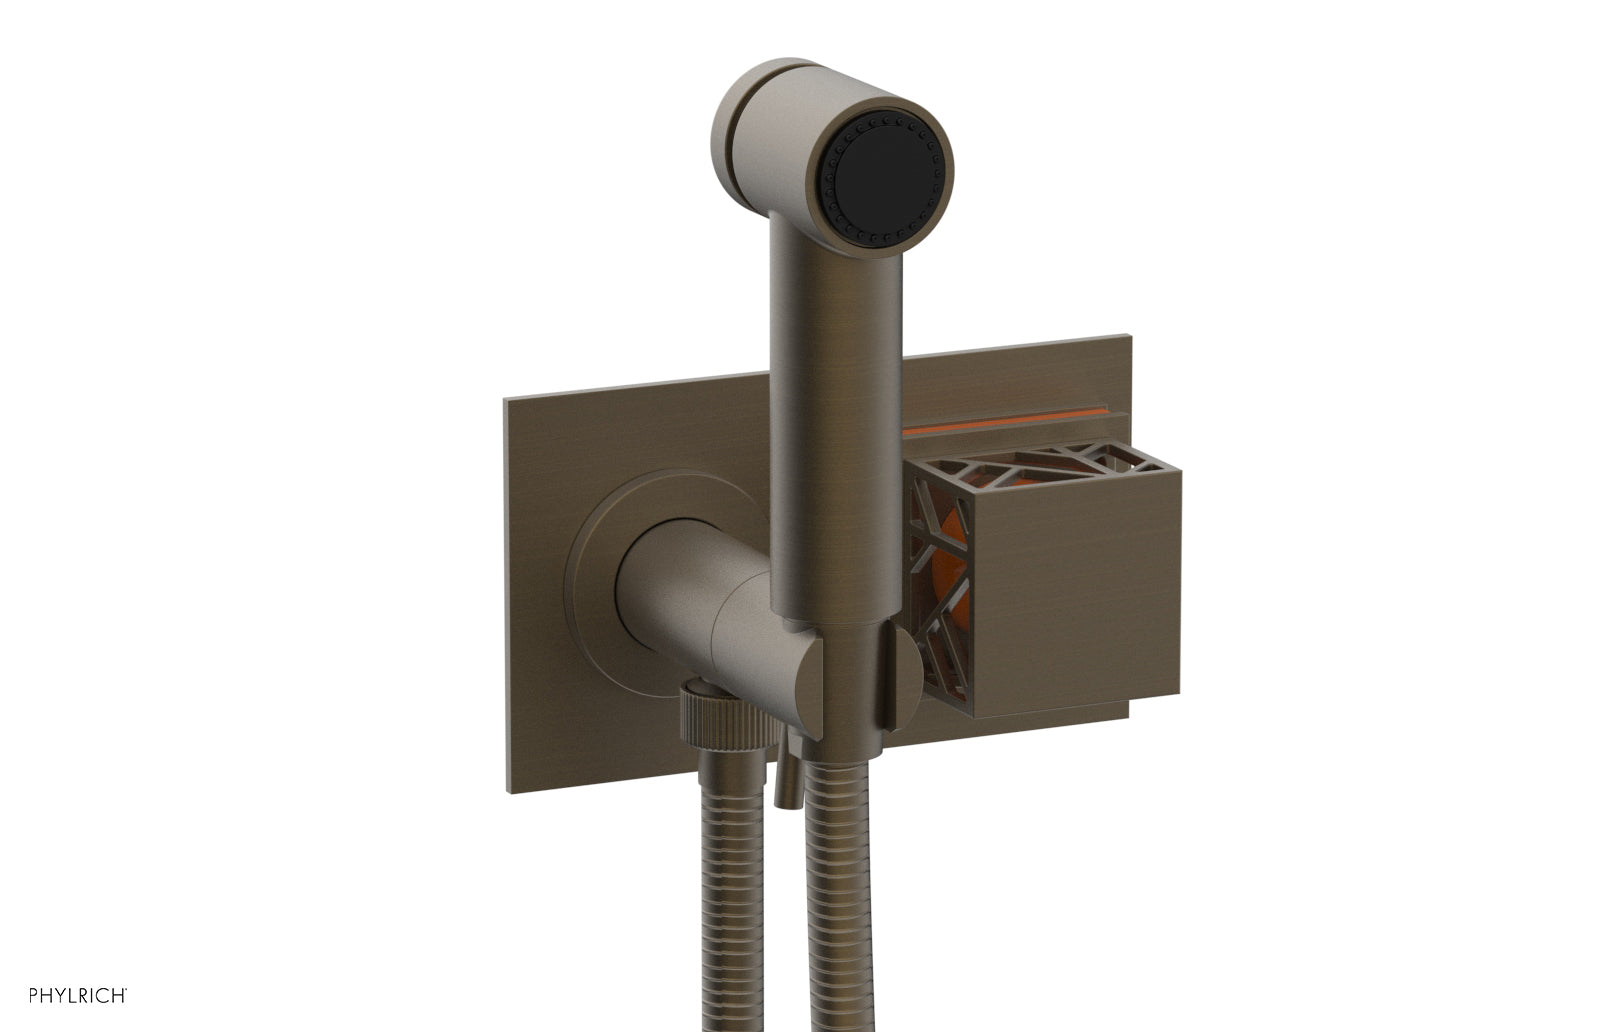 Phylrich JOLIE Wall Mounted Bidet, Square Handle with "Orange" Accents